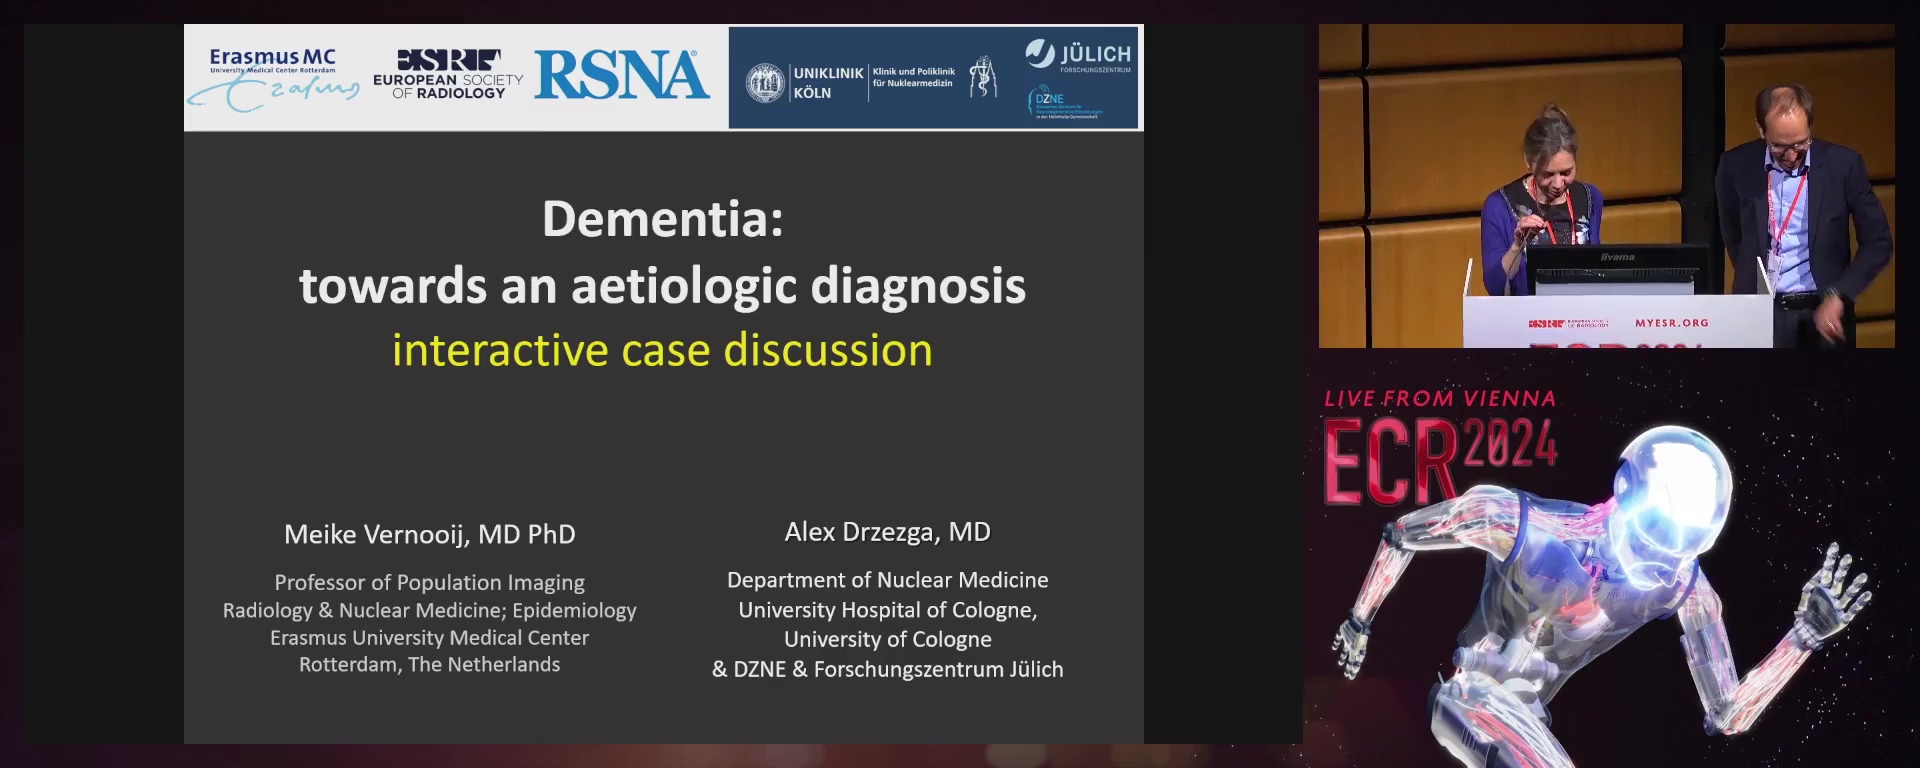 Dementia aetiology: interactive case discussion